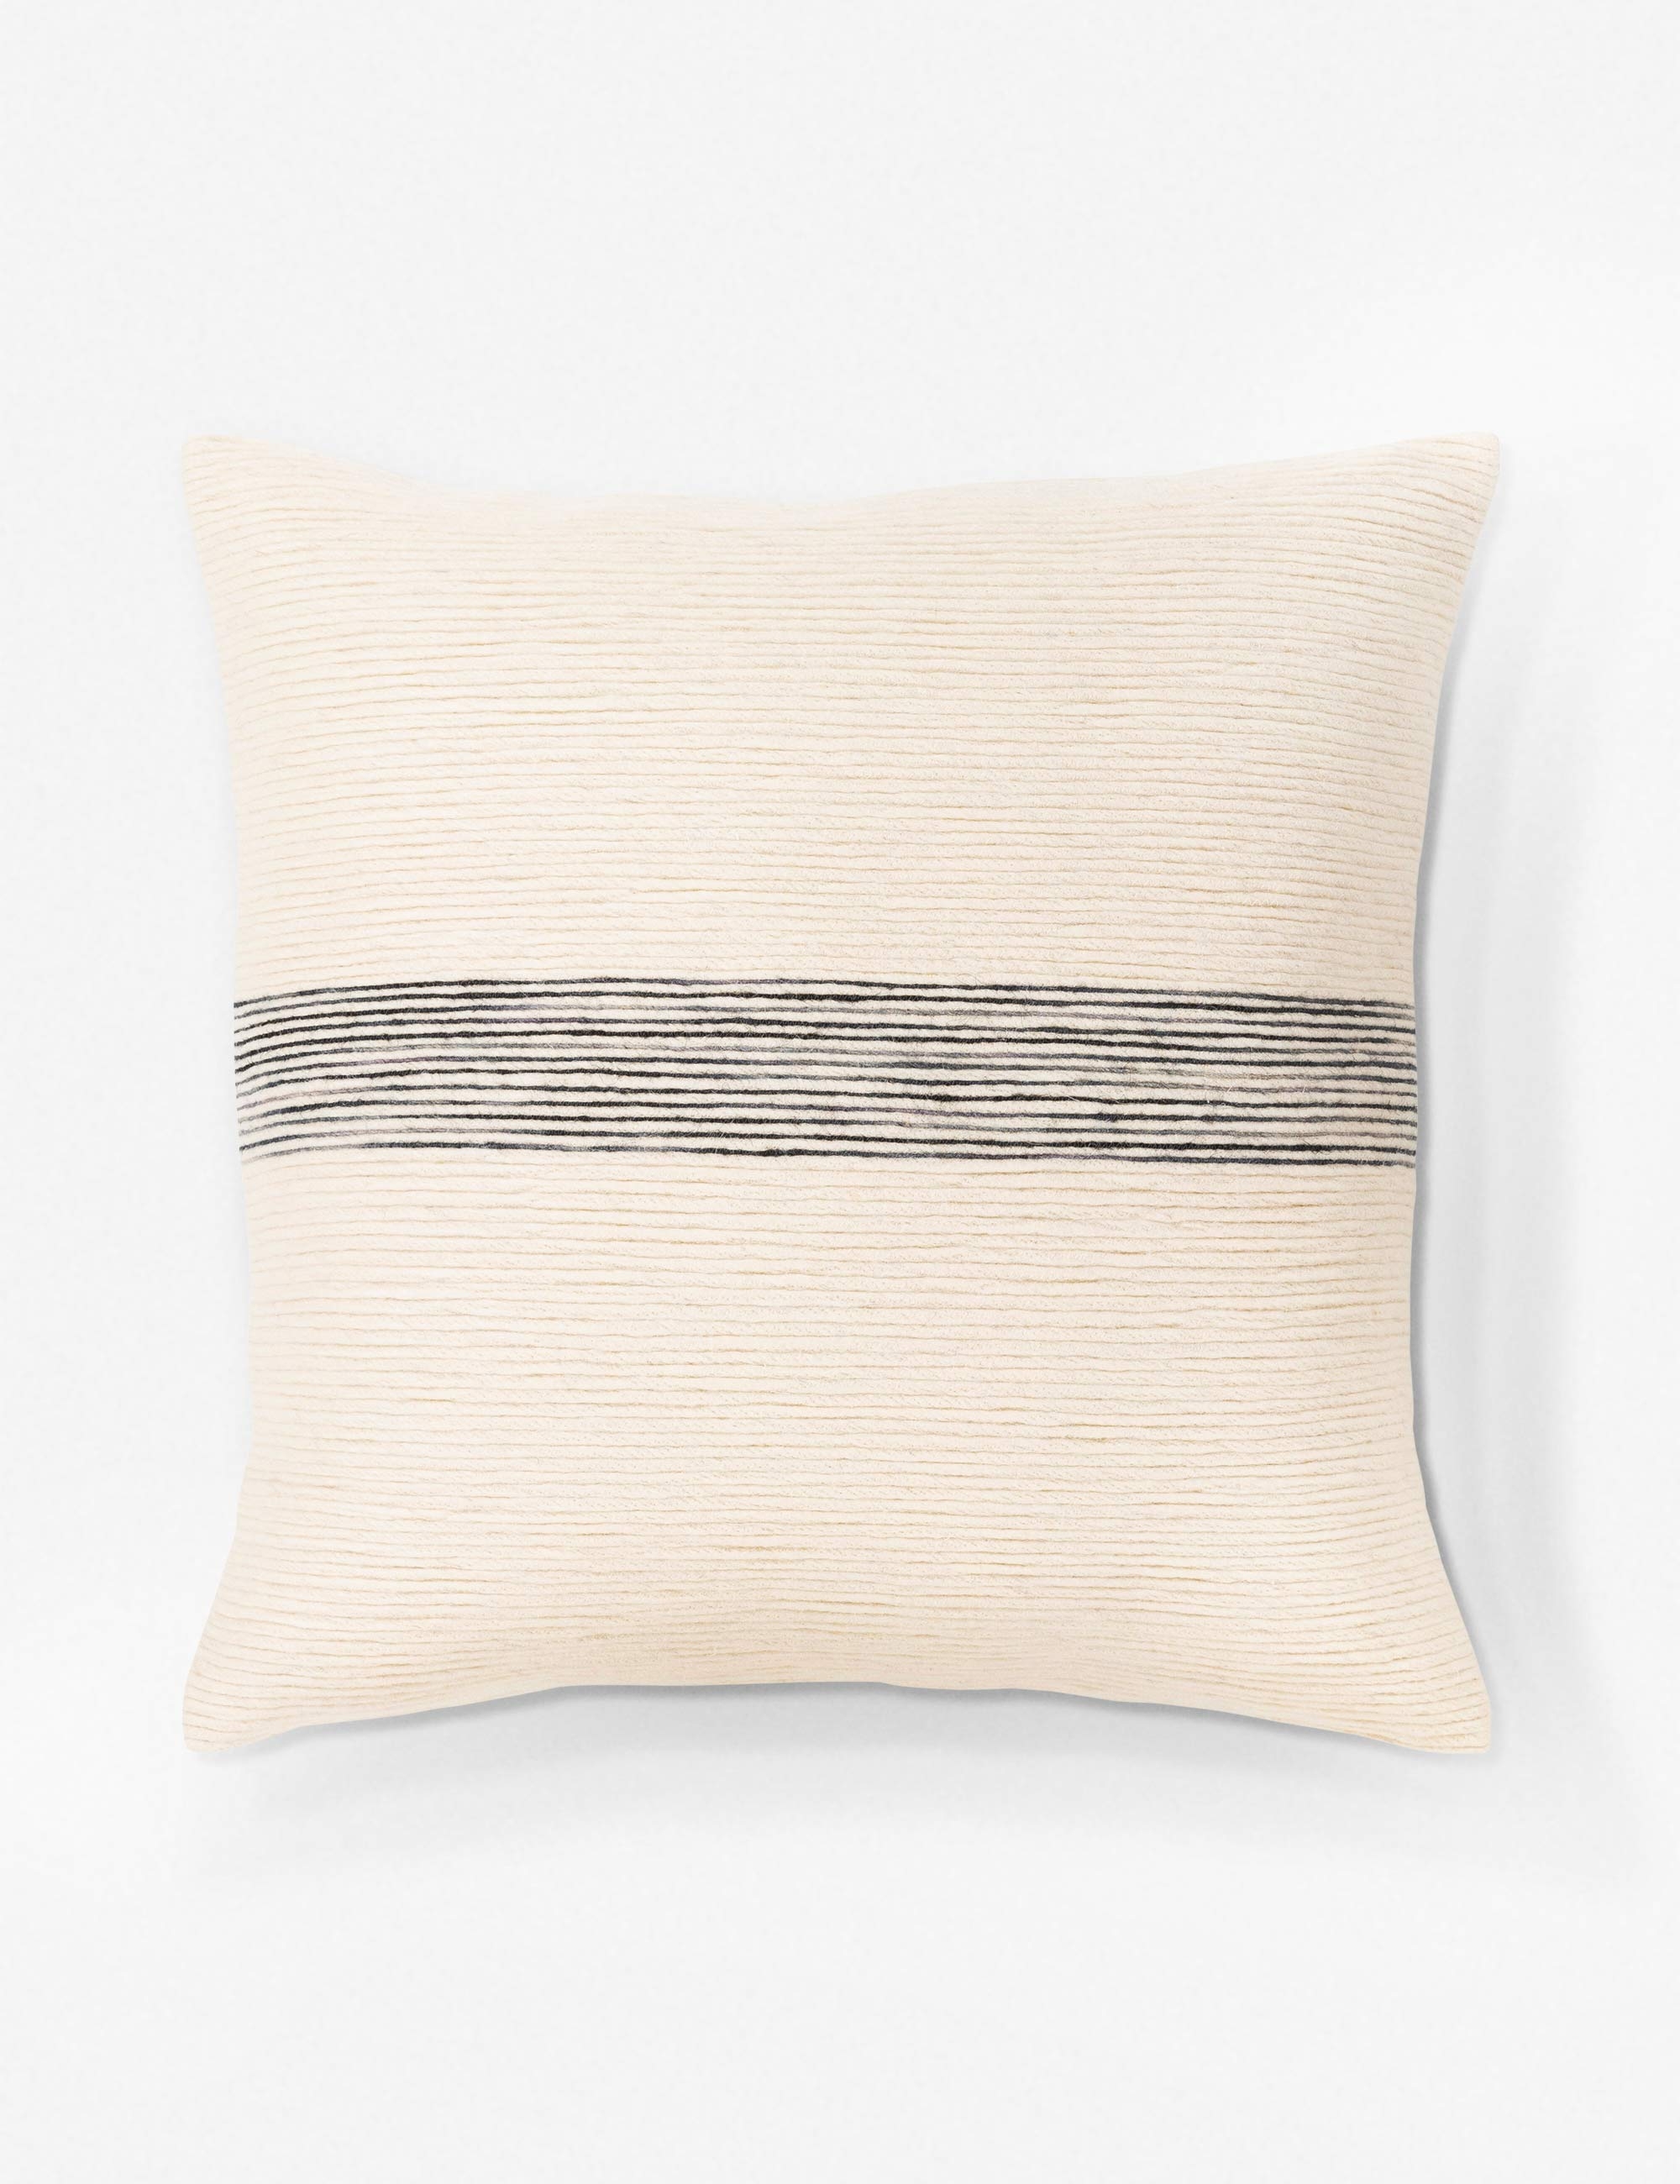 Selma Pillow, Cream and Charcoal - Image 0